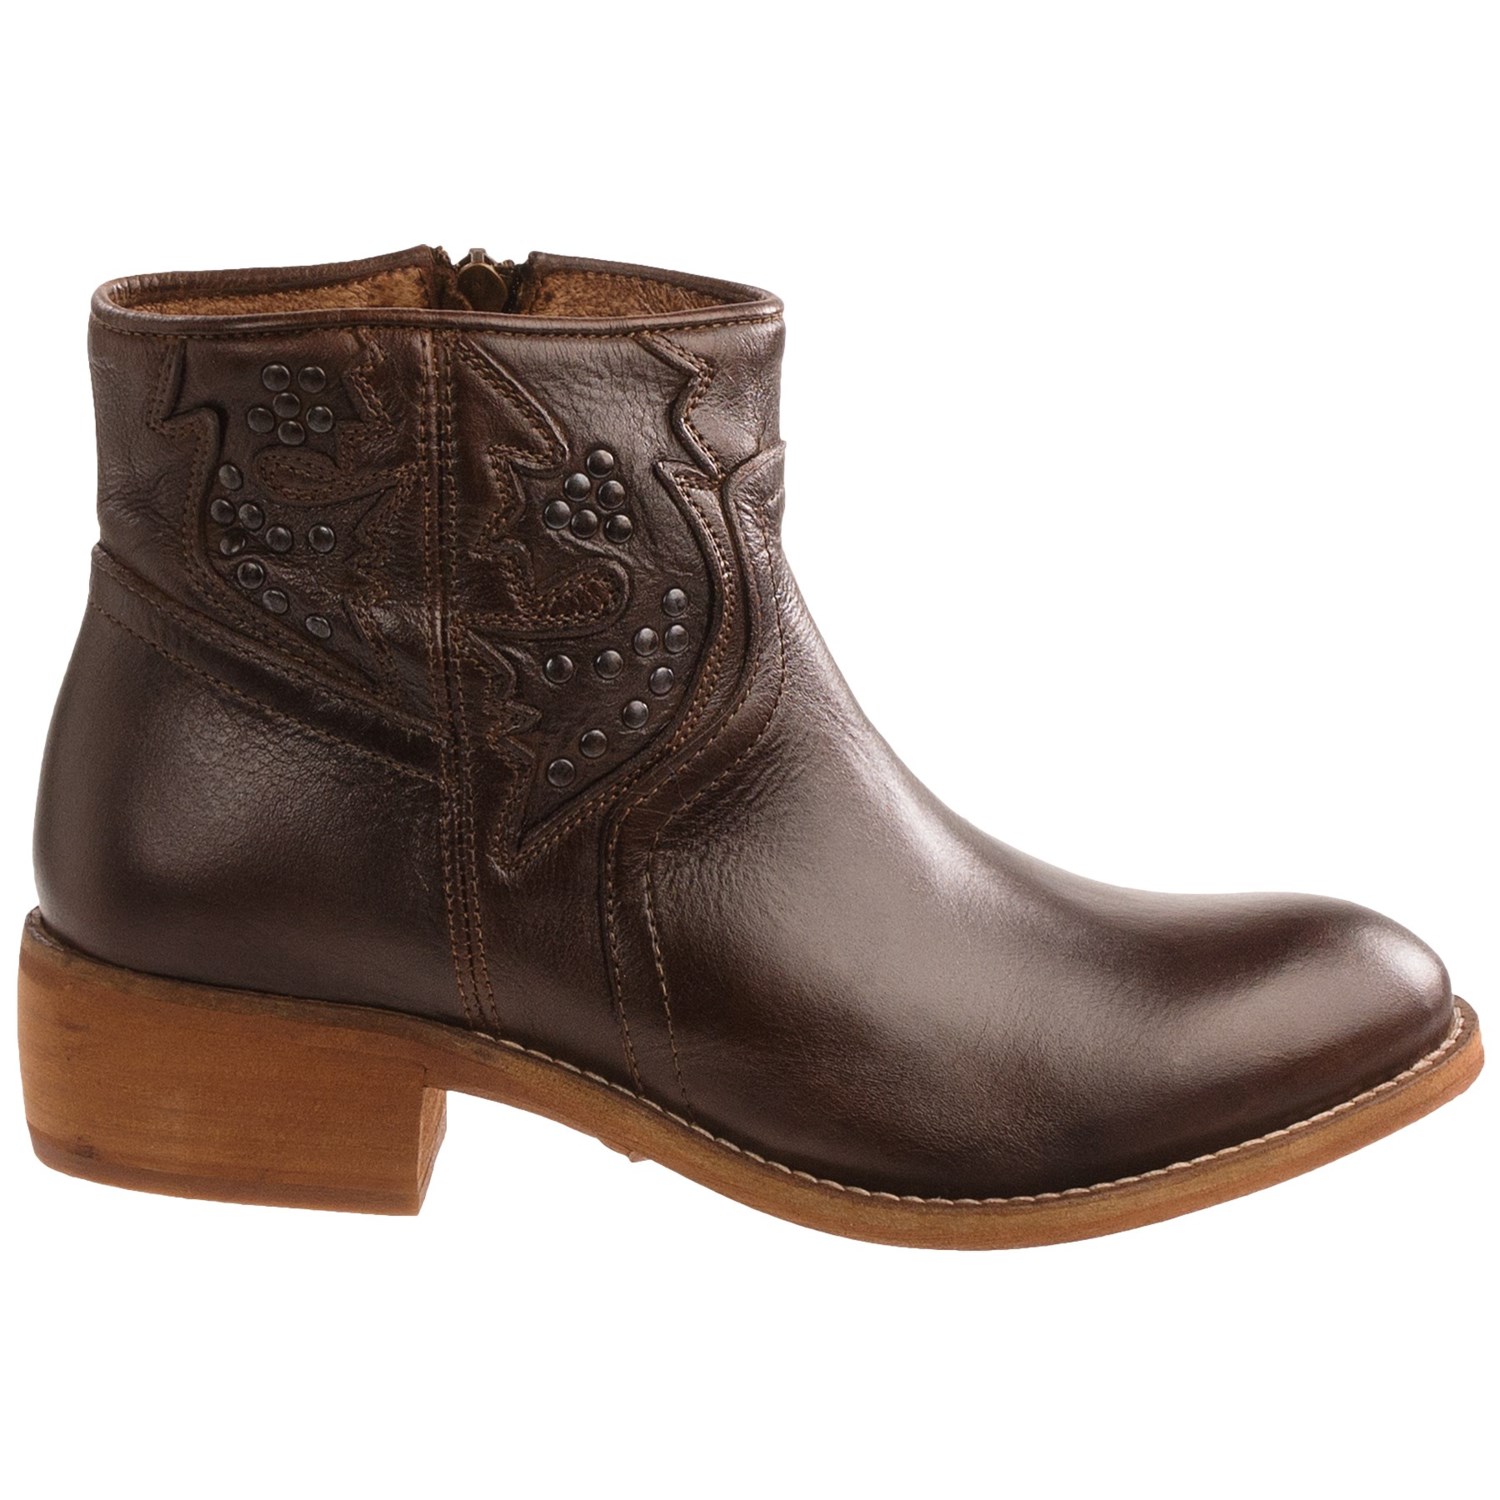 9004Y_4 Taos Footwear Dove Ankle Boots - Leather, Side Zip (For Women)